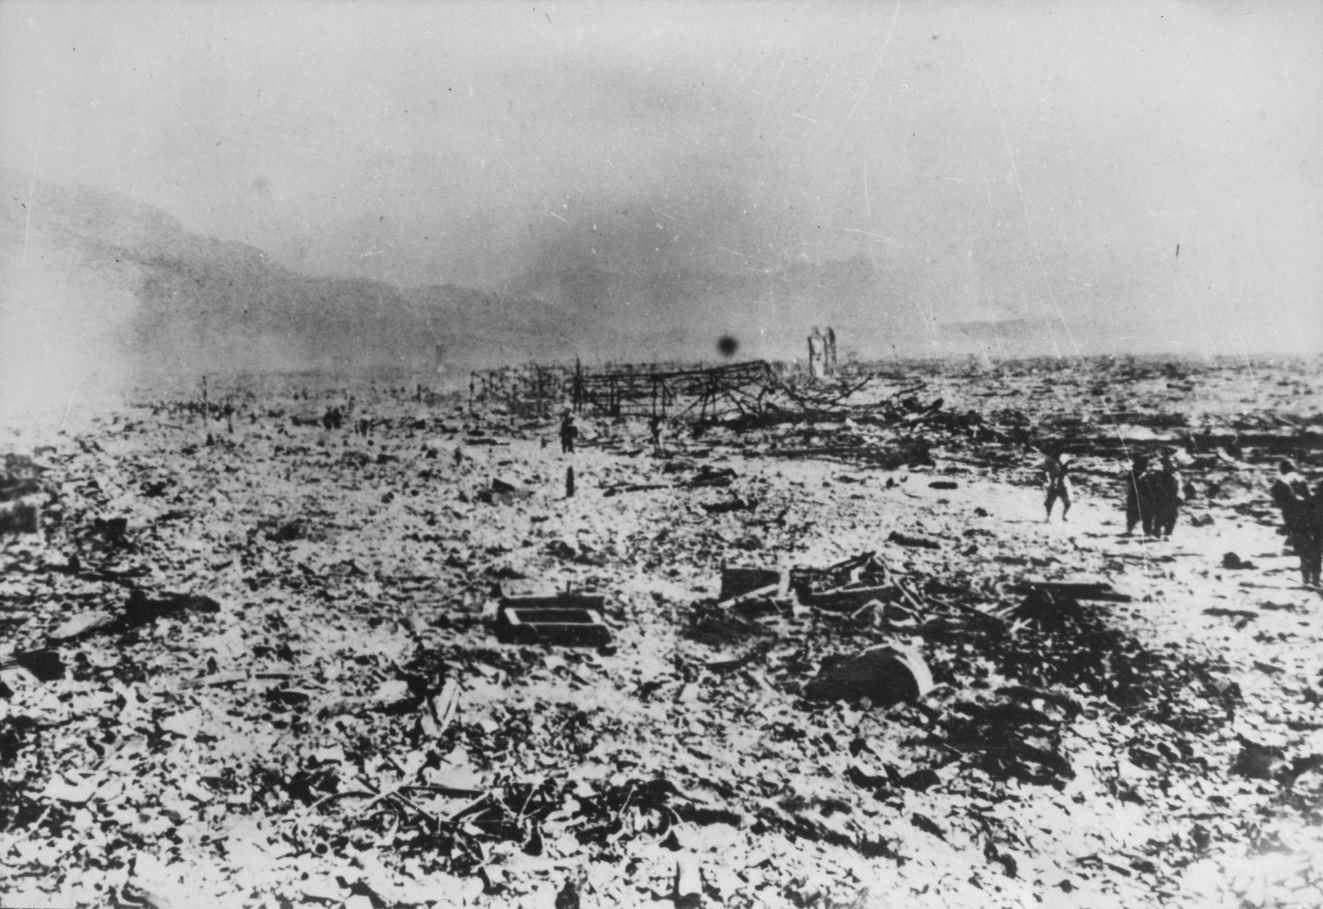 Nagasaki in ruins after the atomic bomb attack, pictured on Aug. 9, 1945.  (Kyodo)